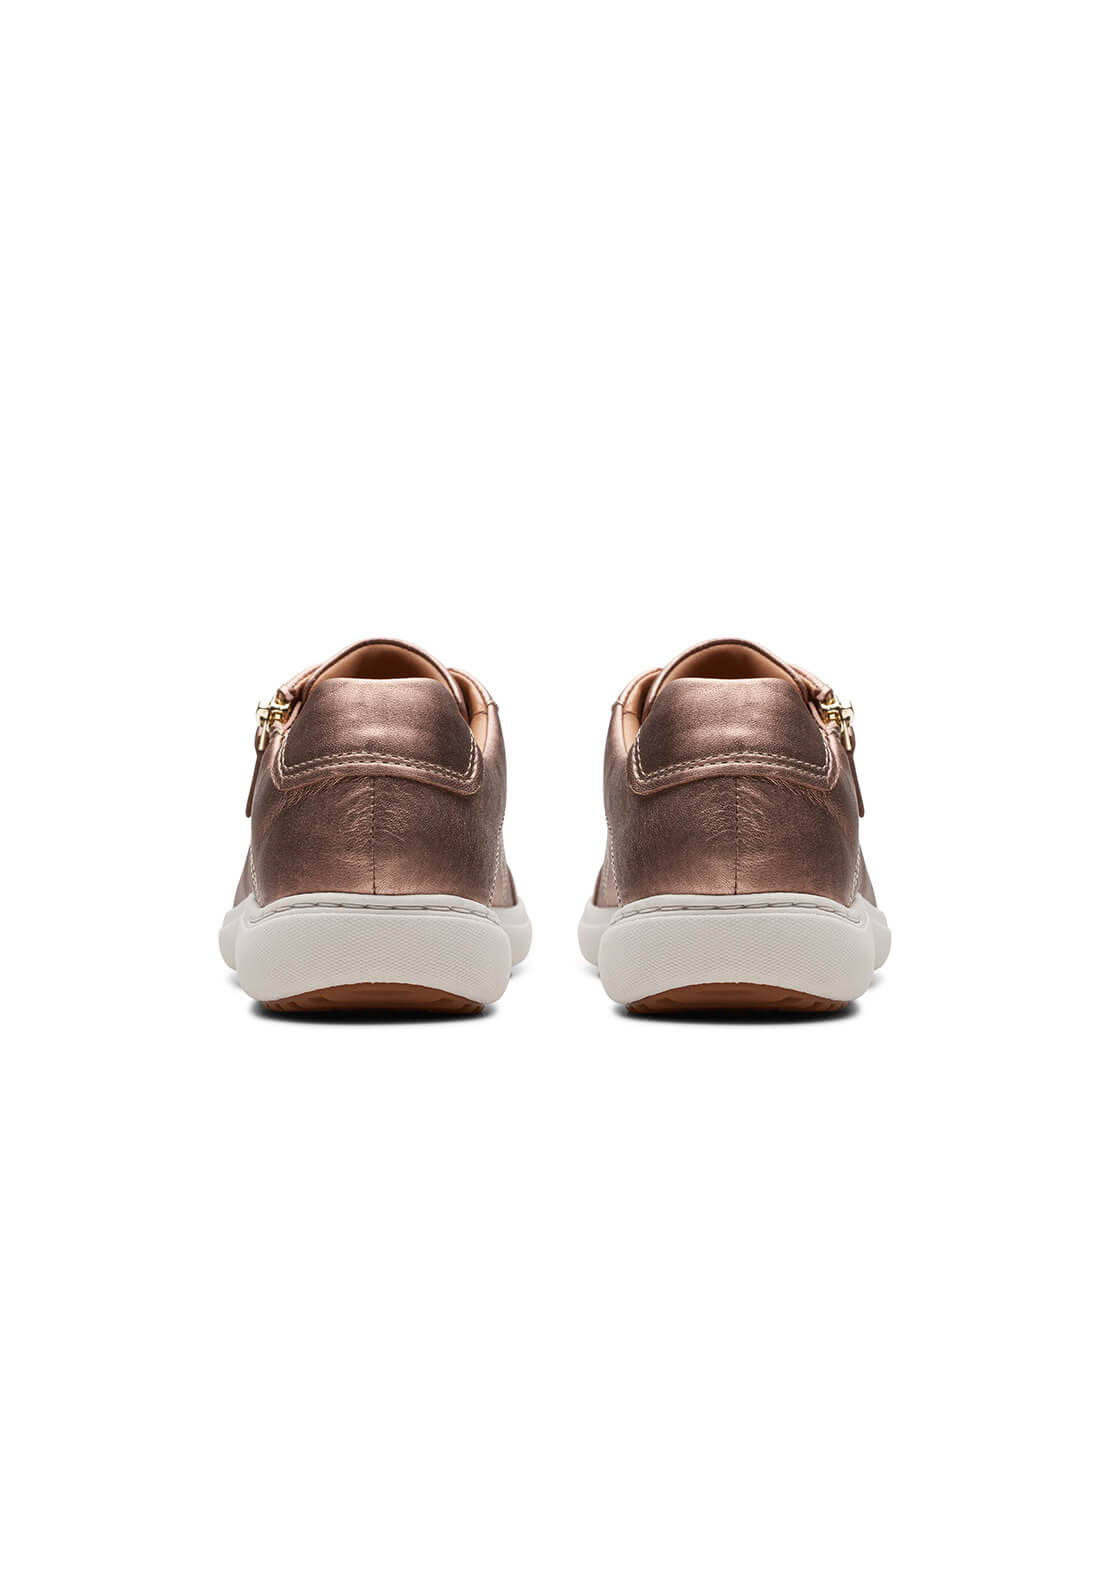 Clarks Nalle Lace Zip Trainer - Rose Gold 4 Shaws Department Stores